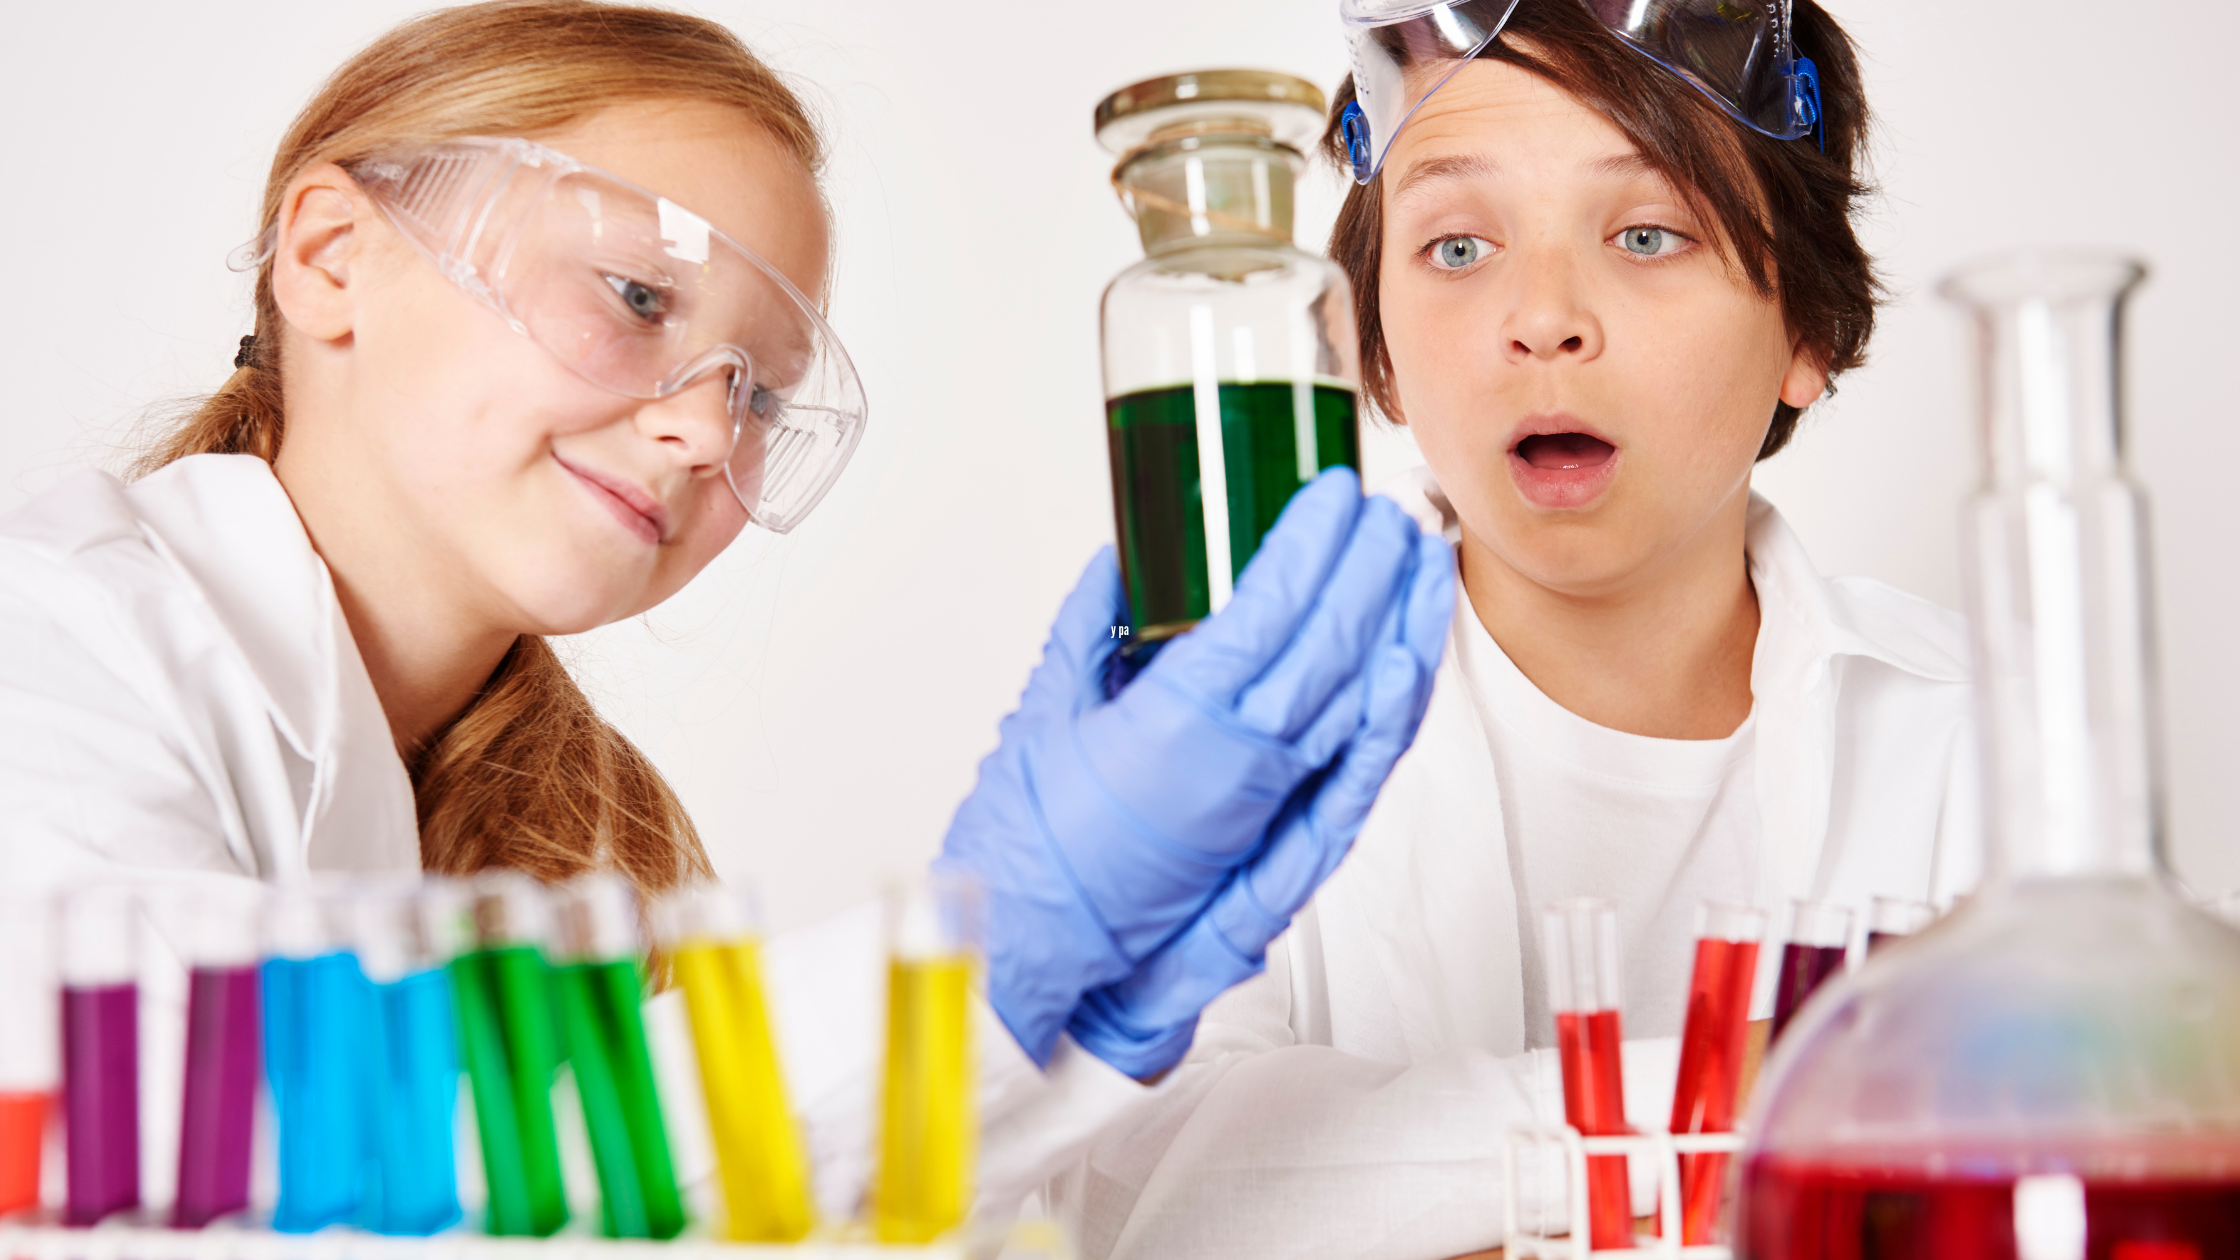 5 Fun & Cool Science Activities with Dye to Do With the Kids 6